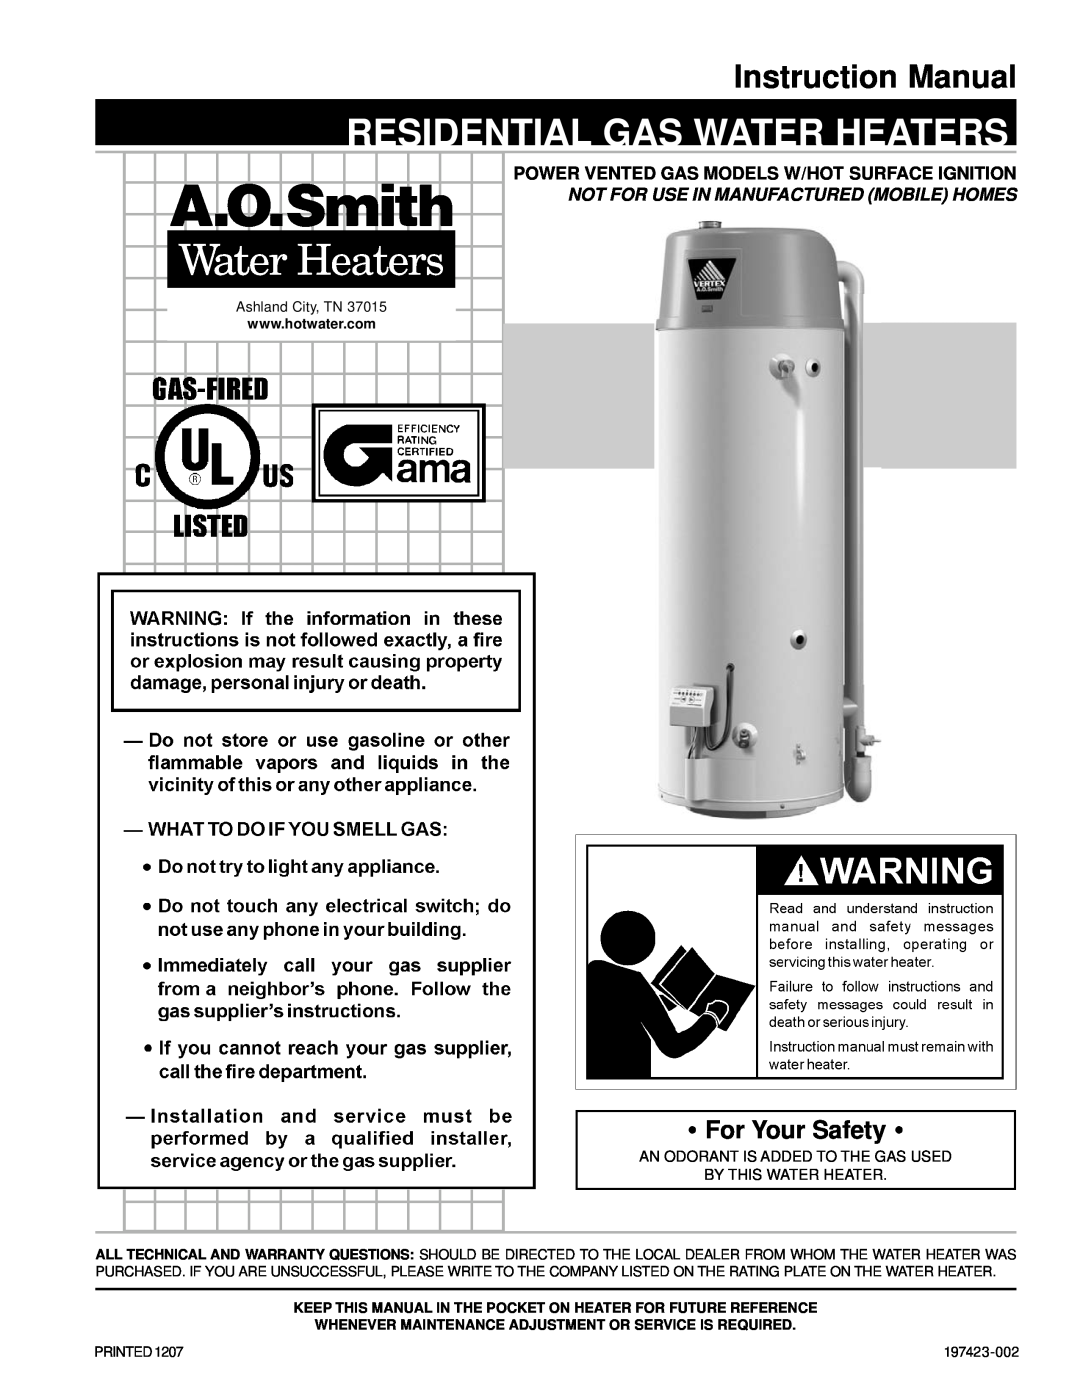 A.O. Smith ARGSS02708 instruction manual For Your Safety, Power Vented Gas Models W/Hot Surface Ignition 